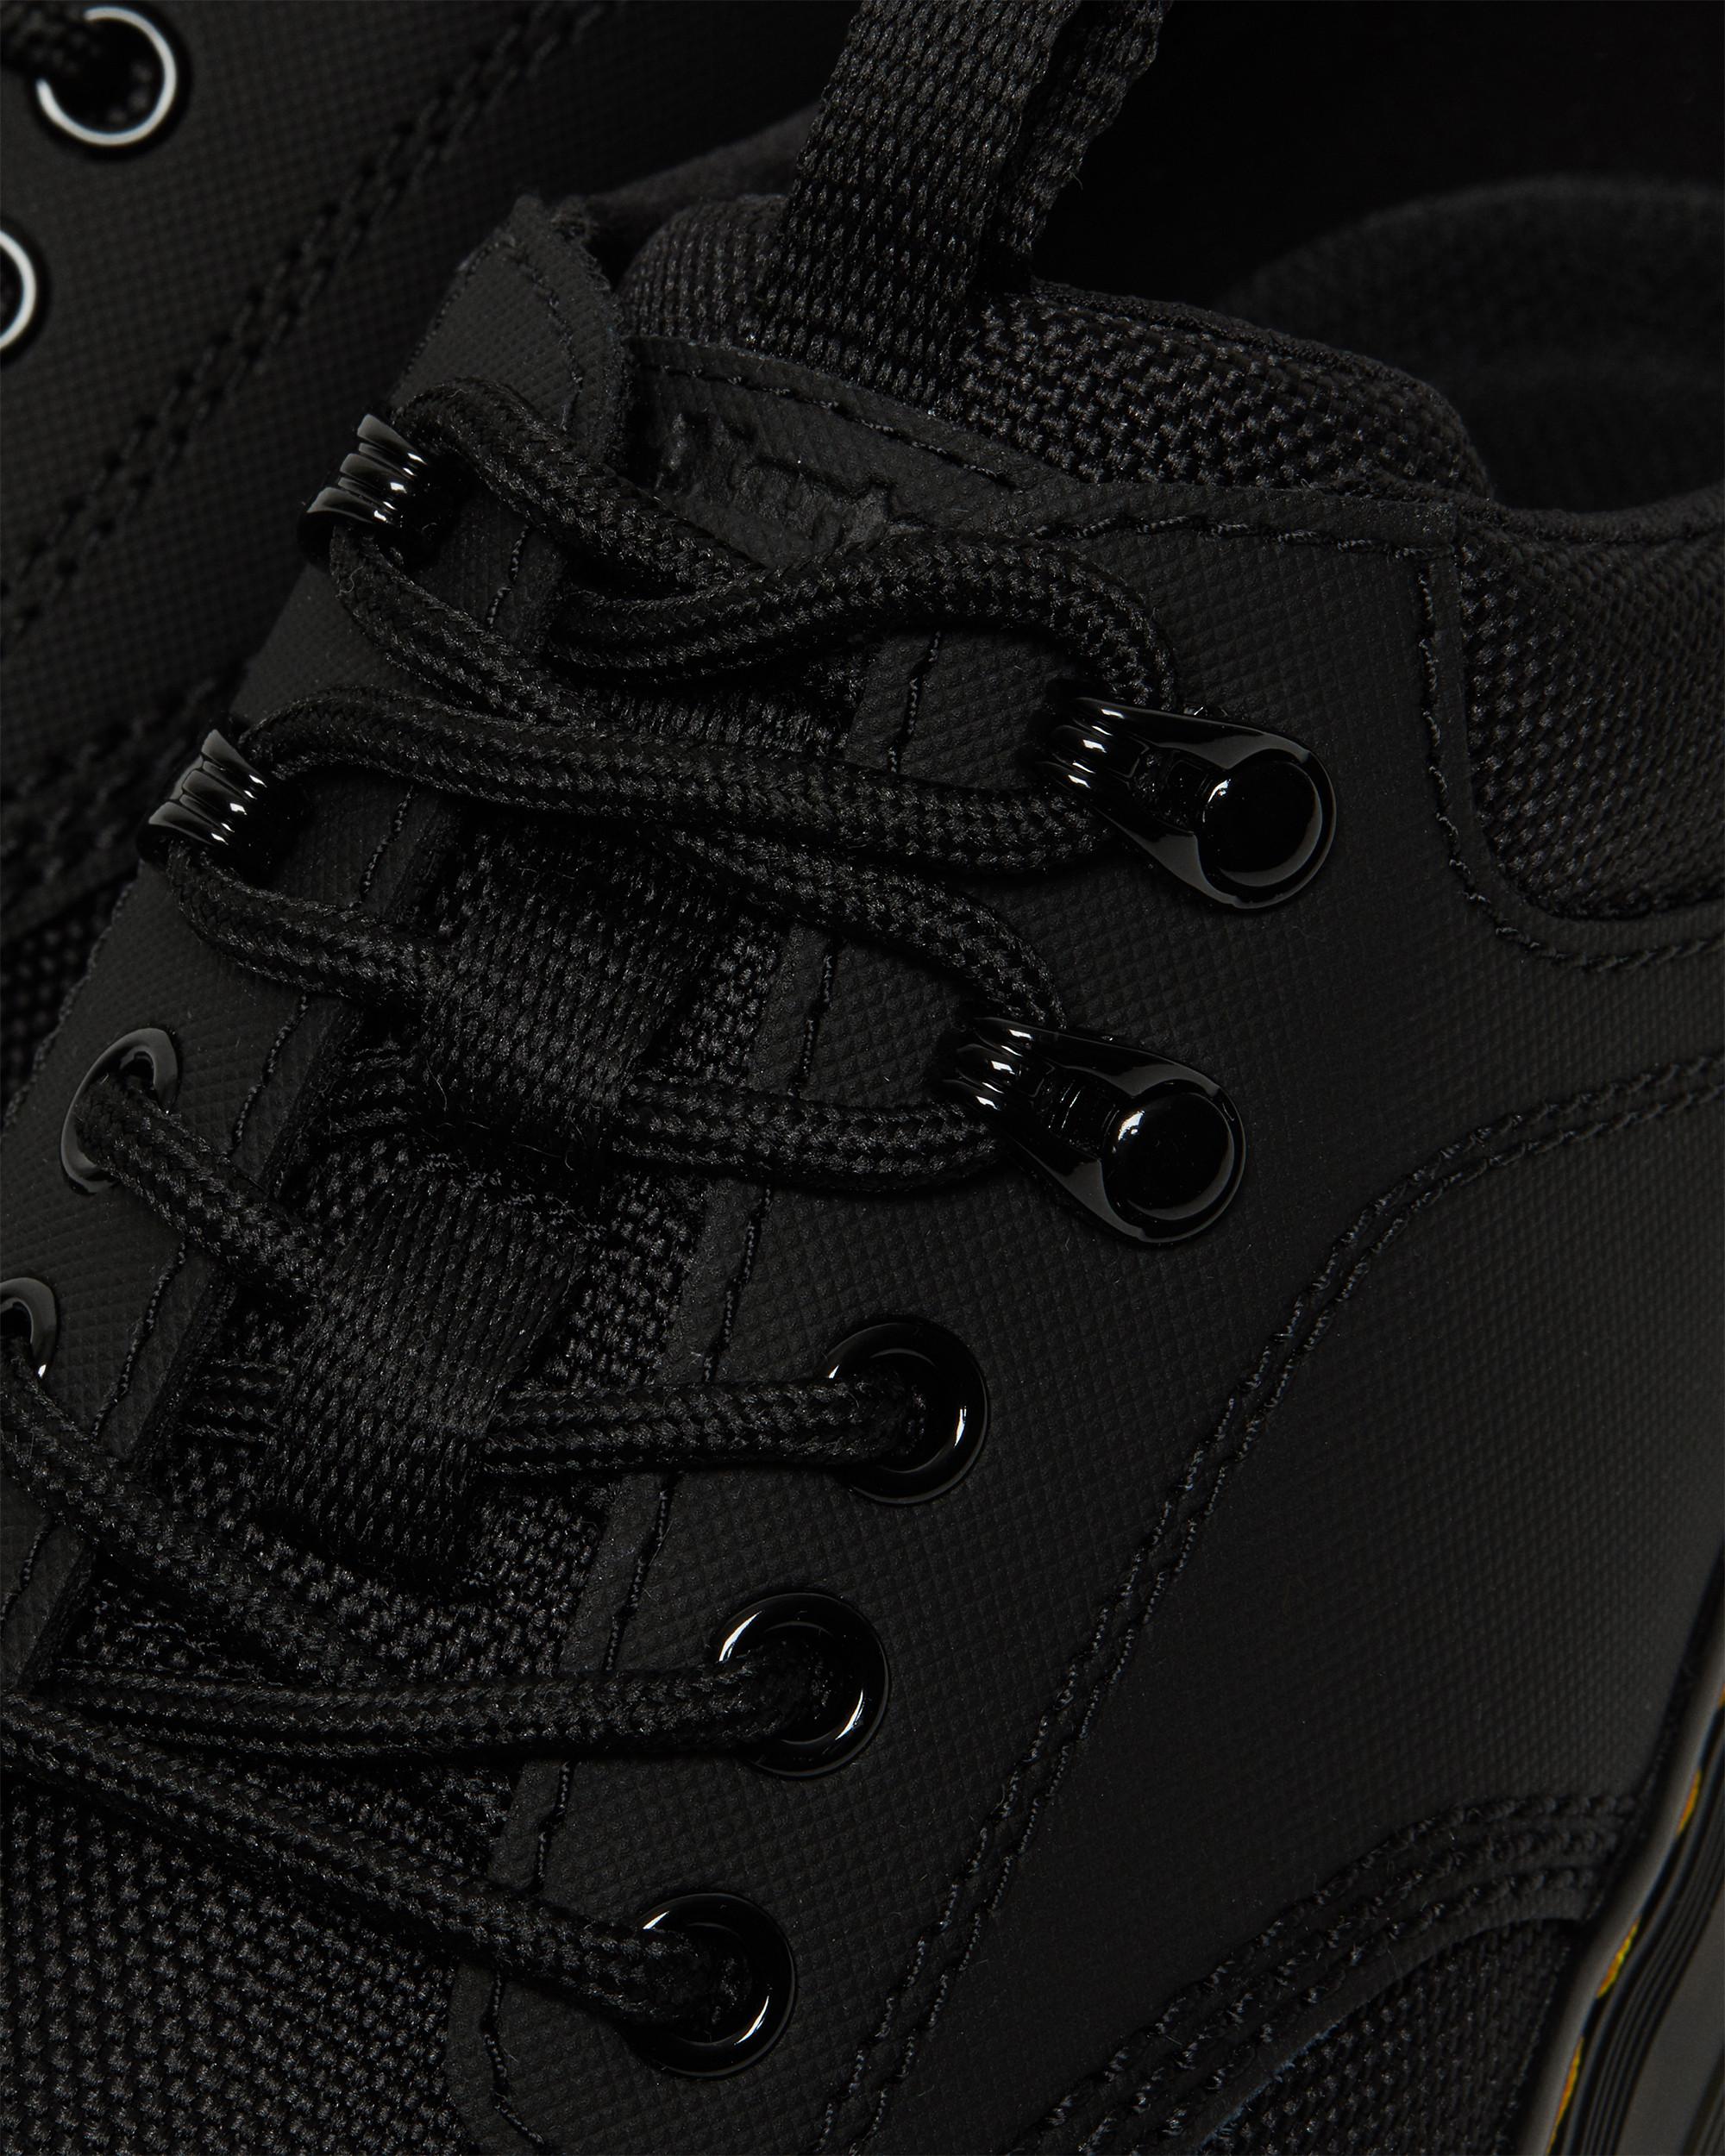 Reeder Extra Tough Utility Shoes in Black